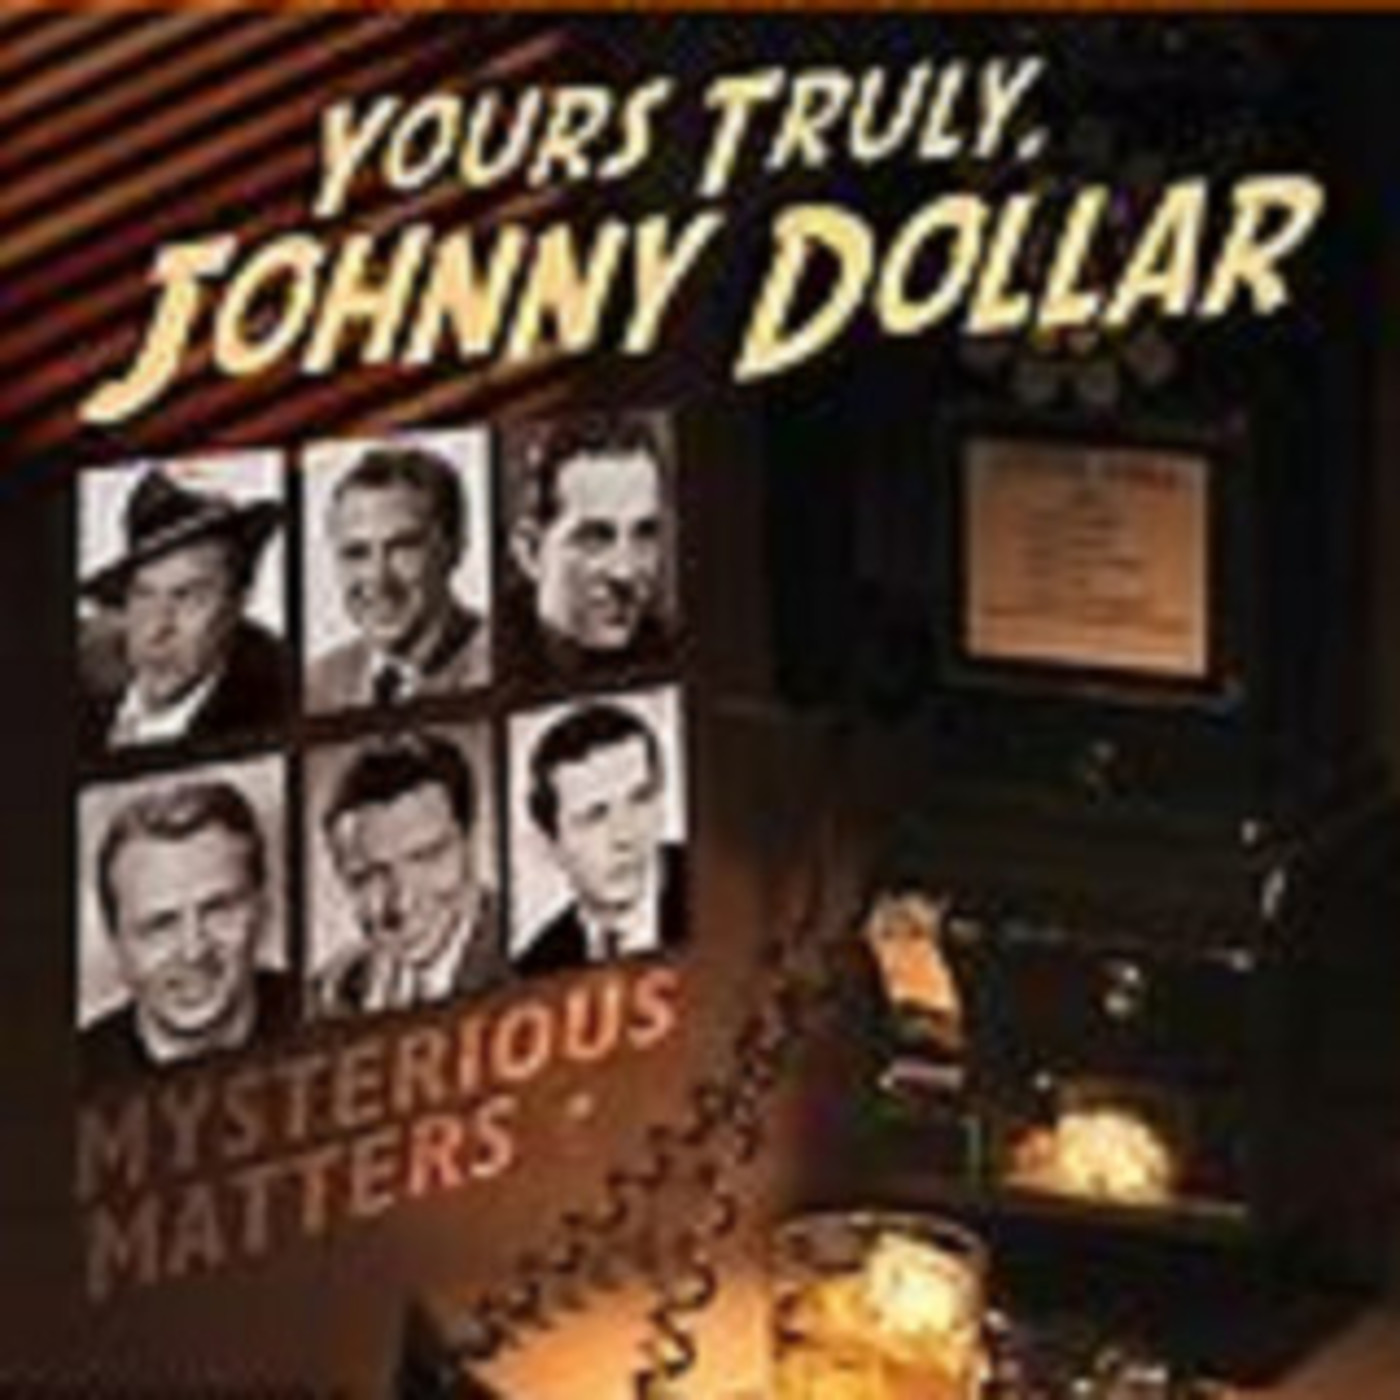 Yours Truly, Johnny Dollar - 080562, episode 803 - The Case of Trouble Matter